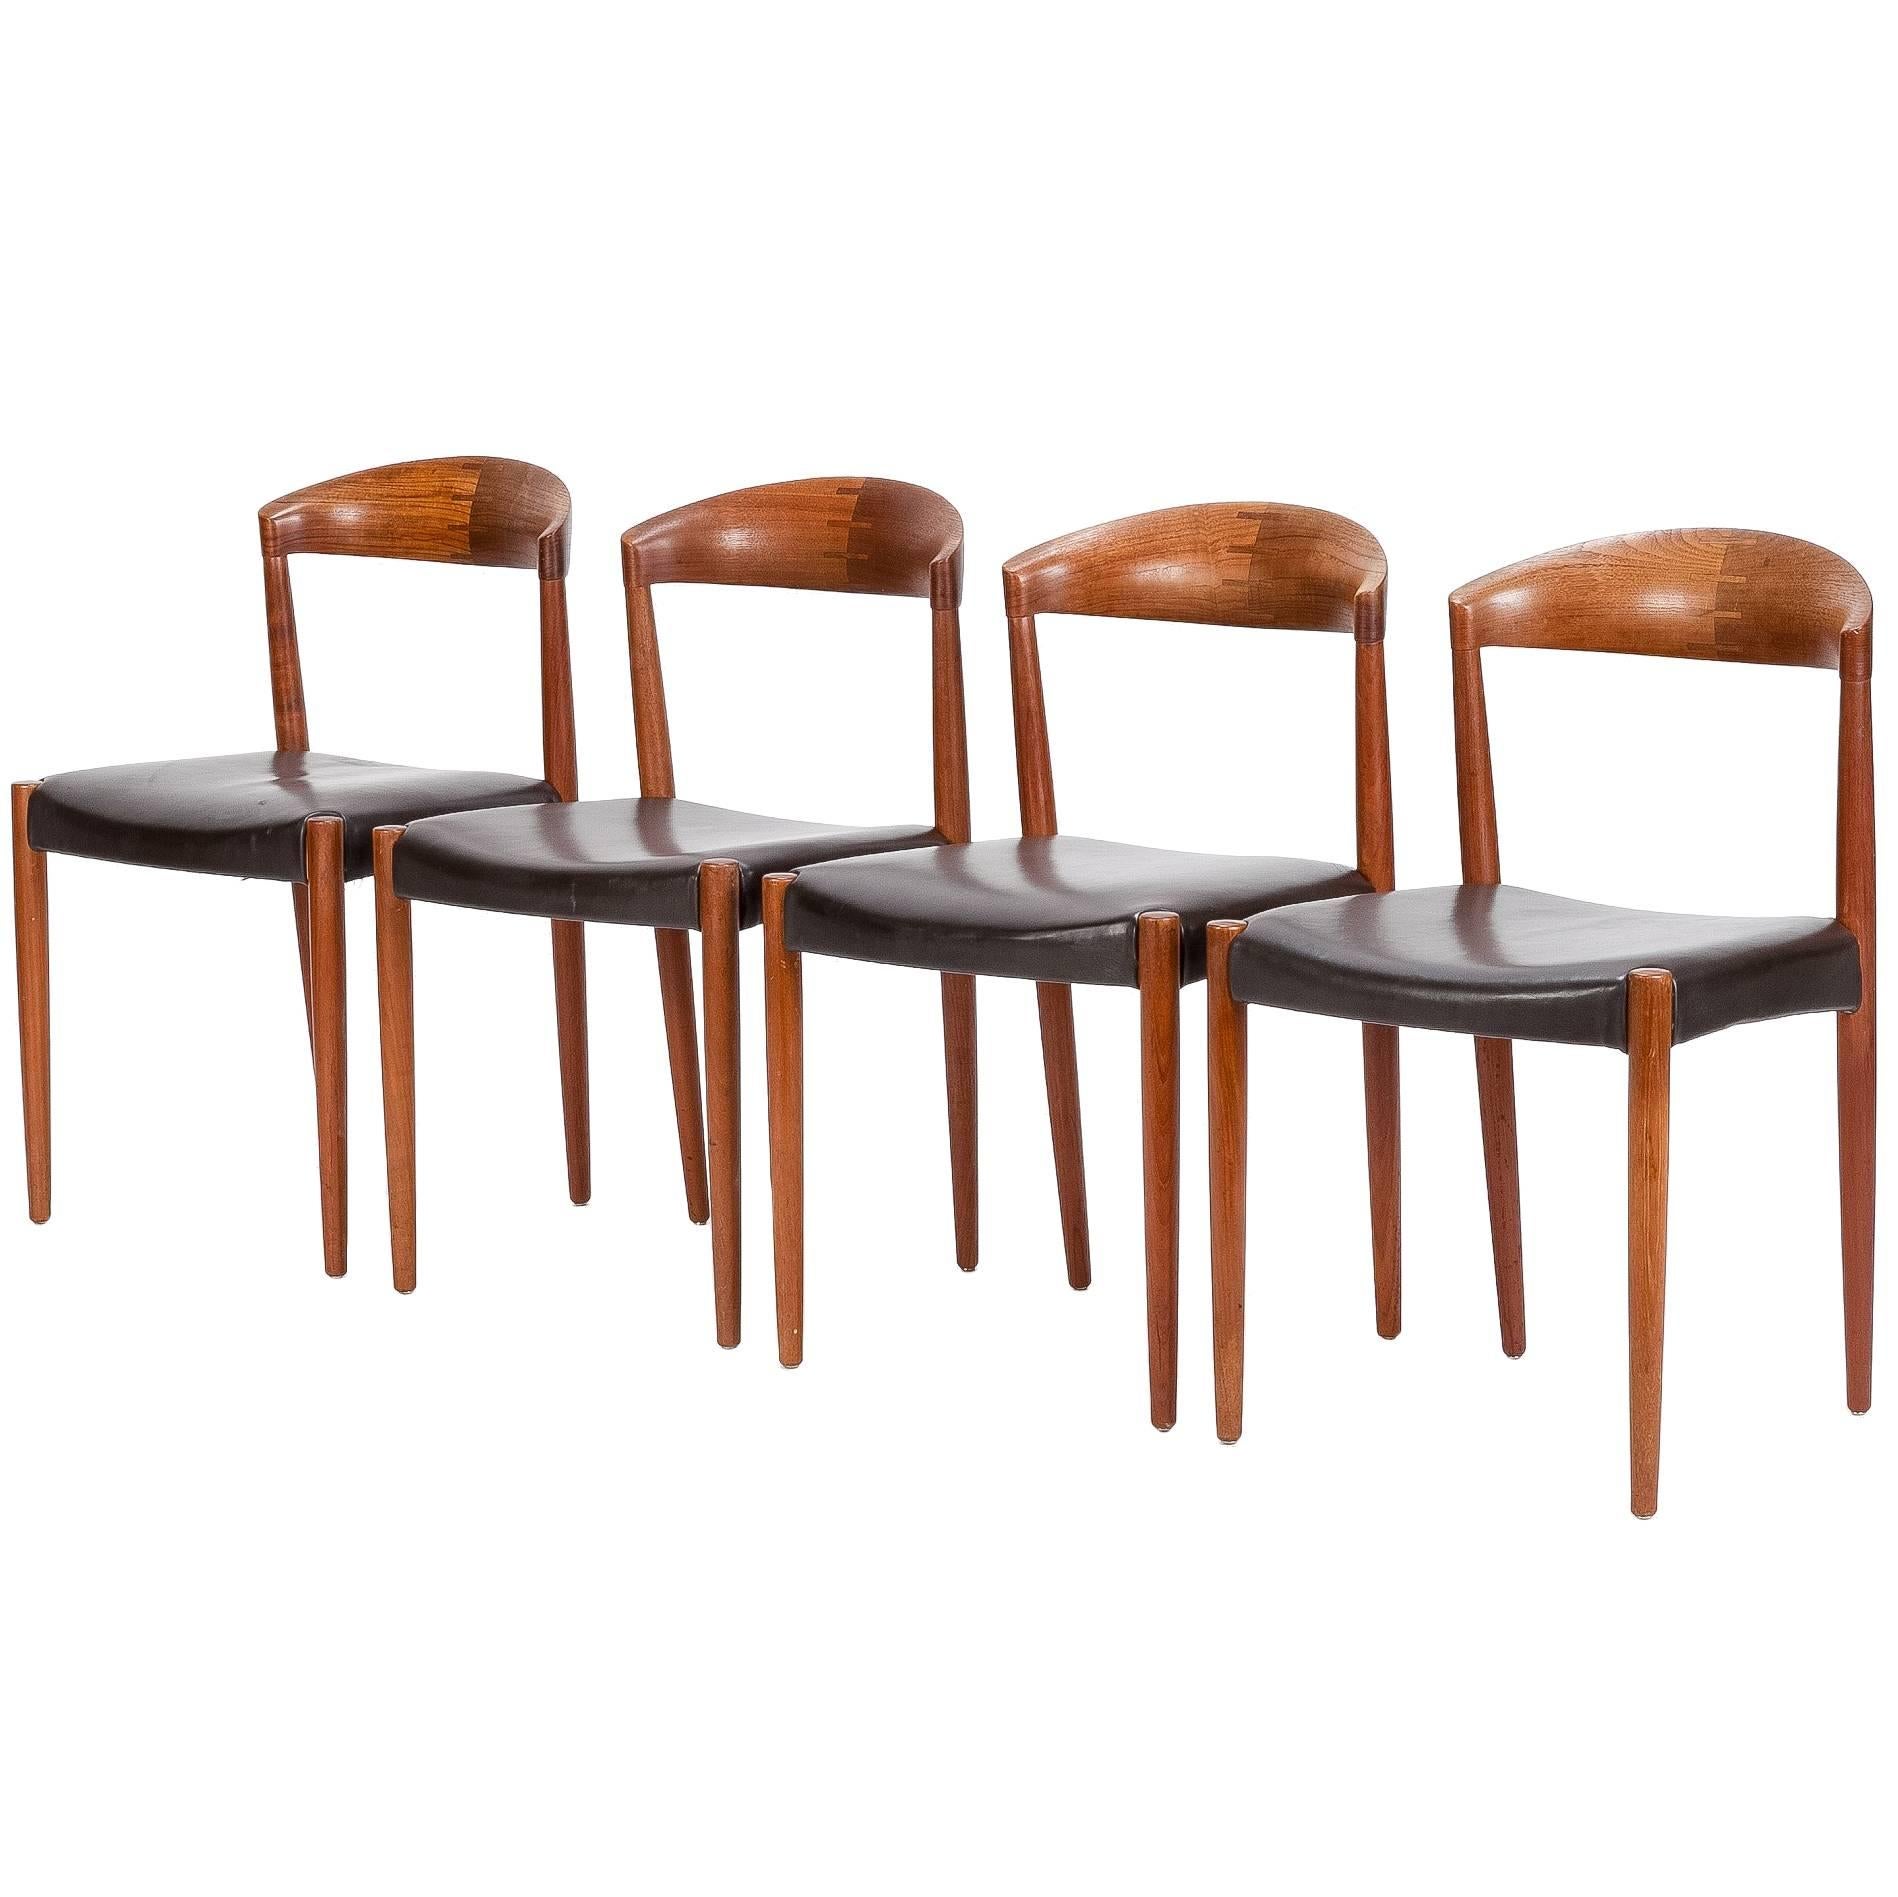 Four Danish Teak and Leather Chairs by Knud Andersen, 1960s For Sale